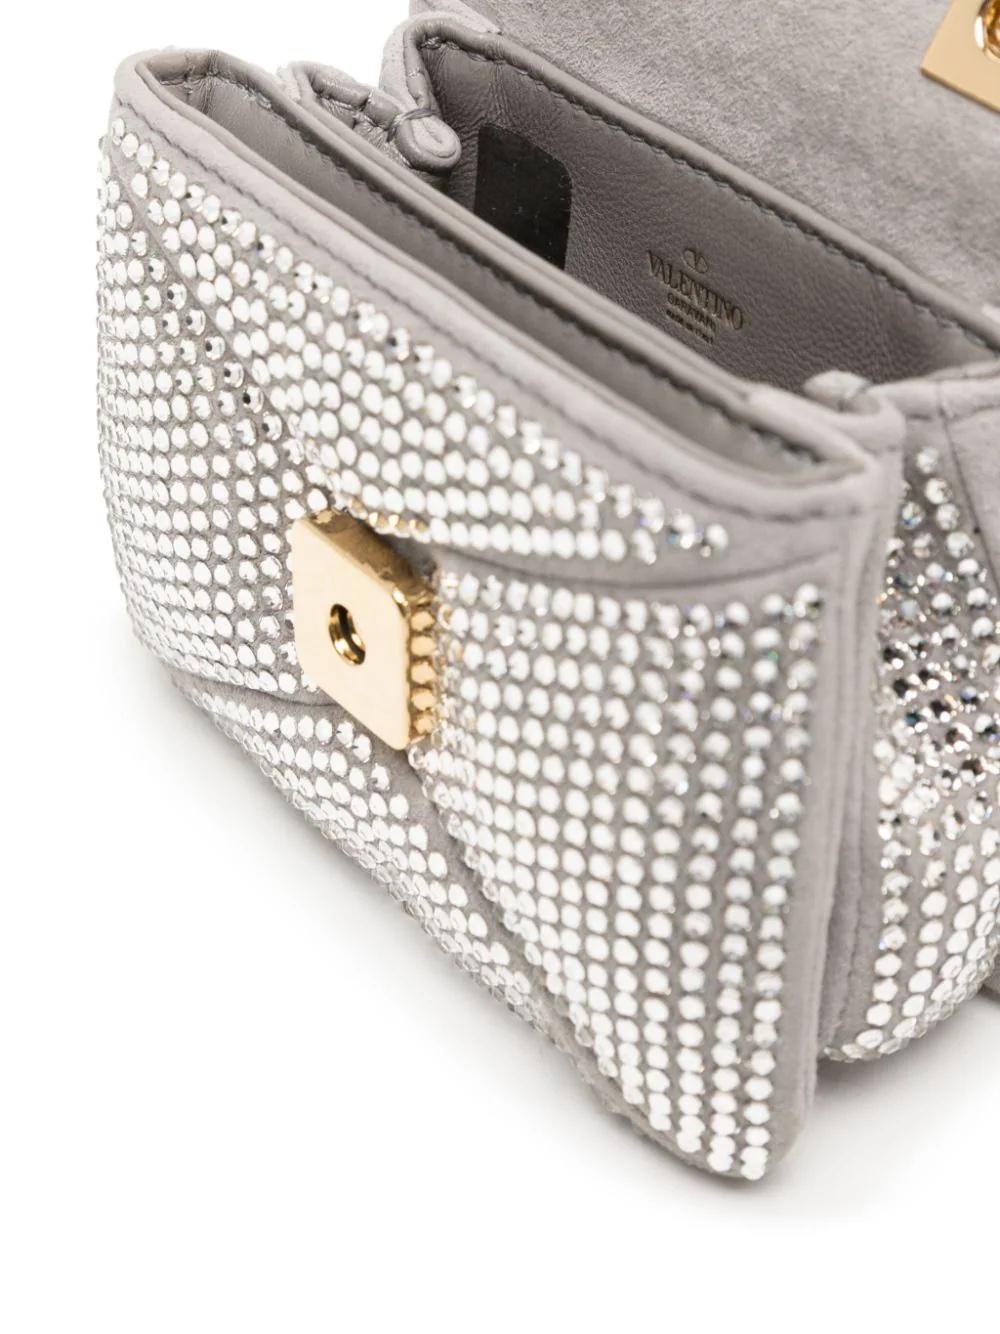 Valentino SIlver Micro One Stud Leather Bag In Excellent Condition For Sale In London, GB